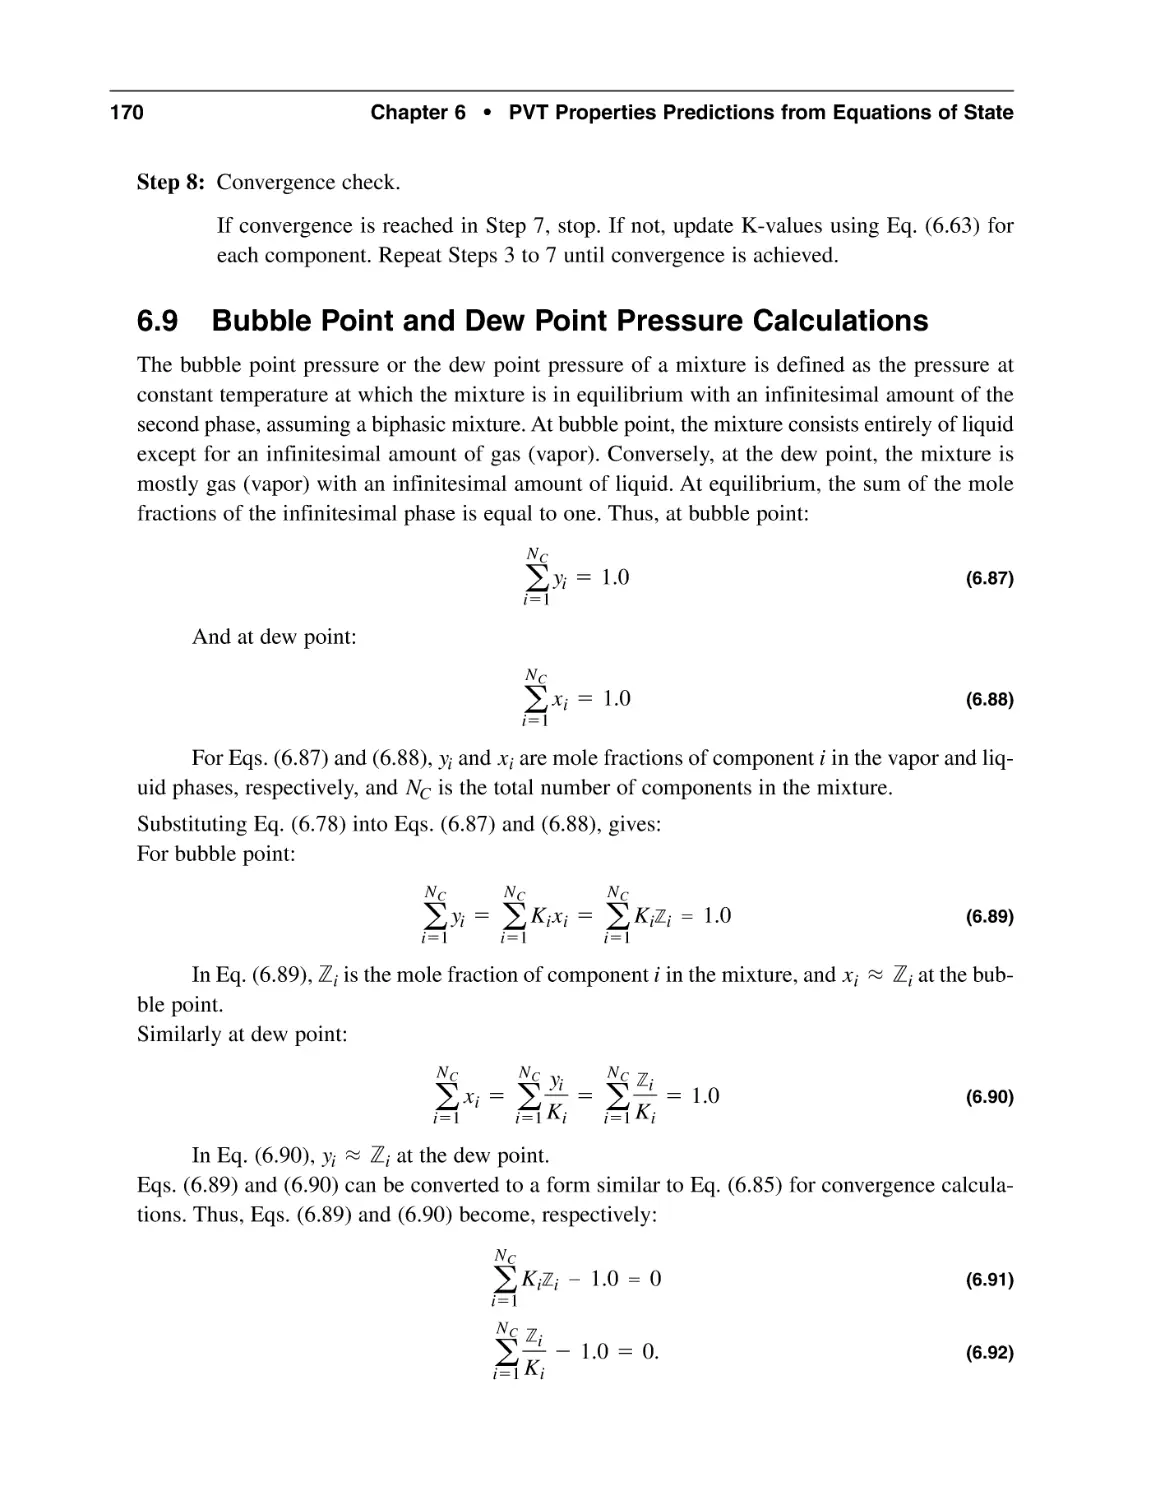 6.9 Bubble Point and Dew Point Pressure Calculations